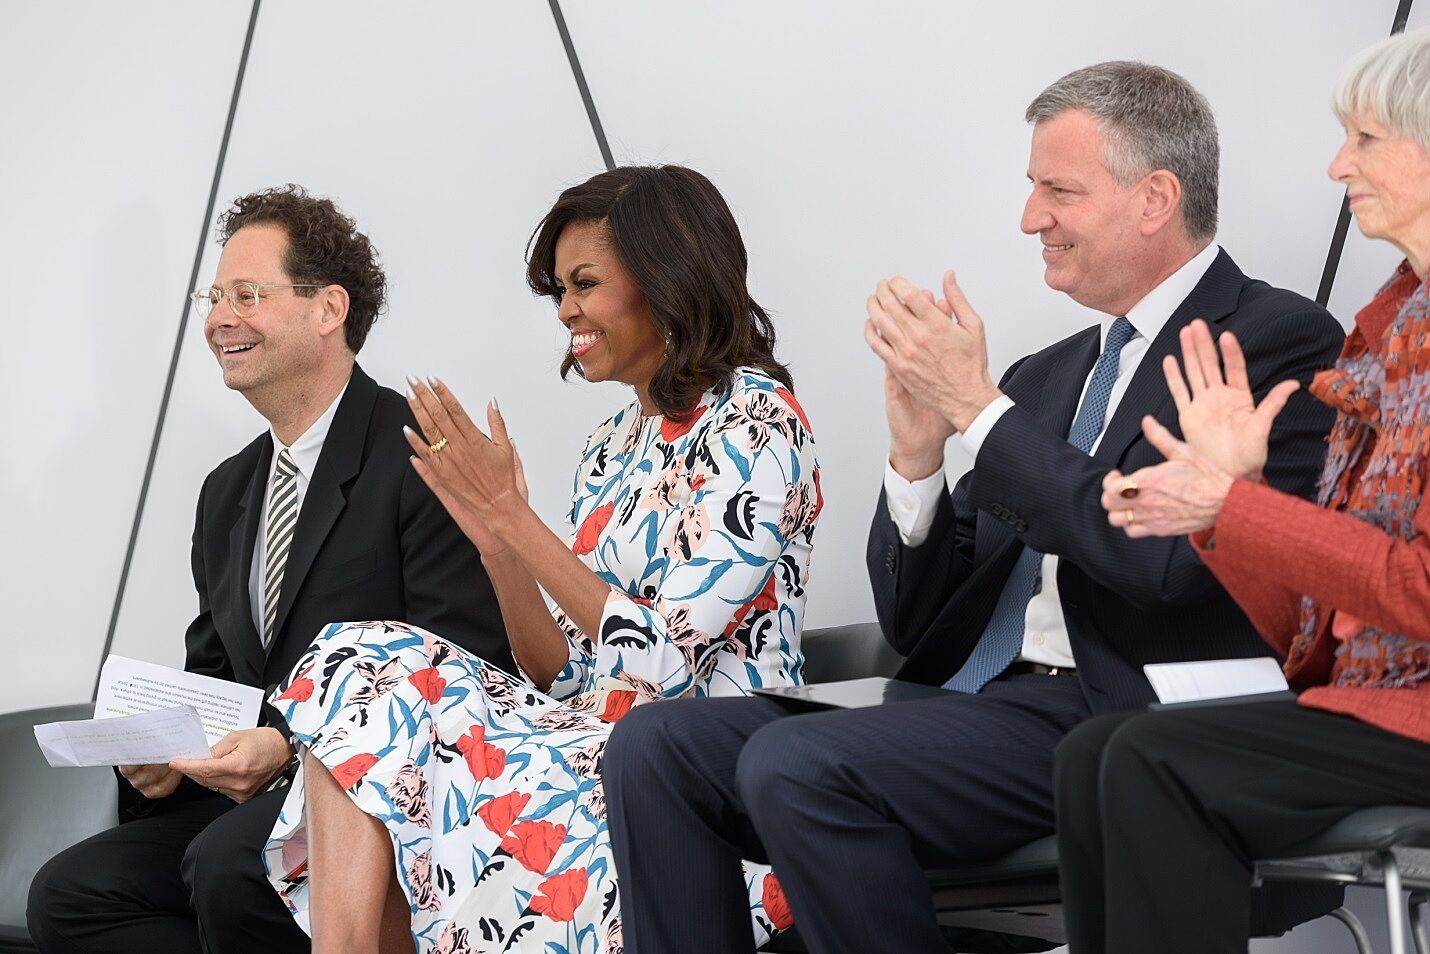 The museum director Adam Weinberg sits with Michell Obama and Mayor DeBlasio.